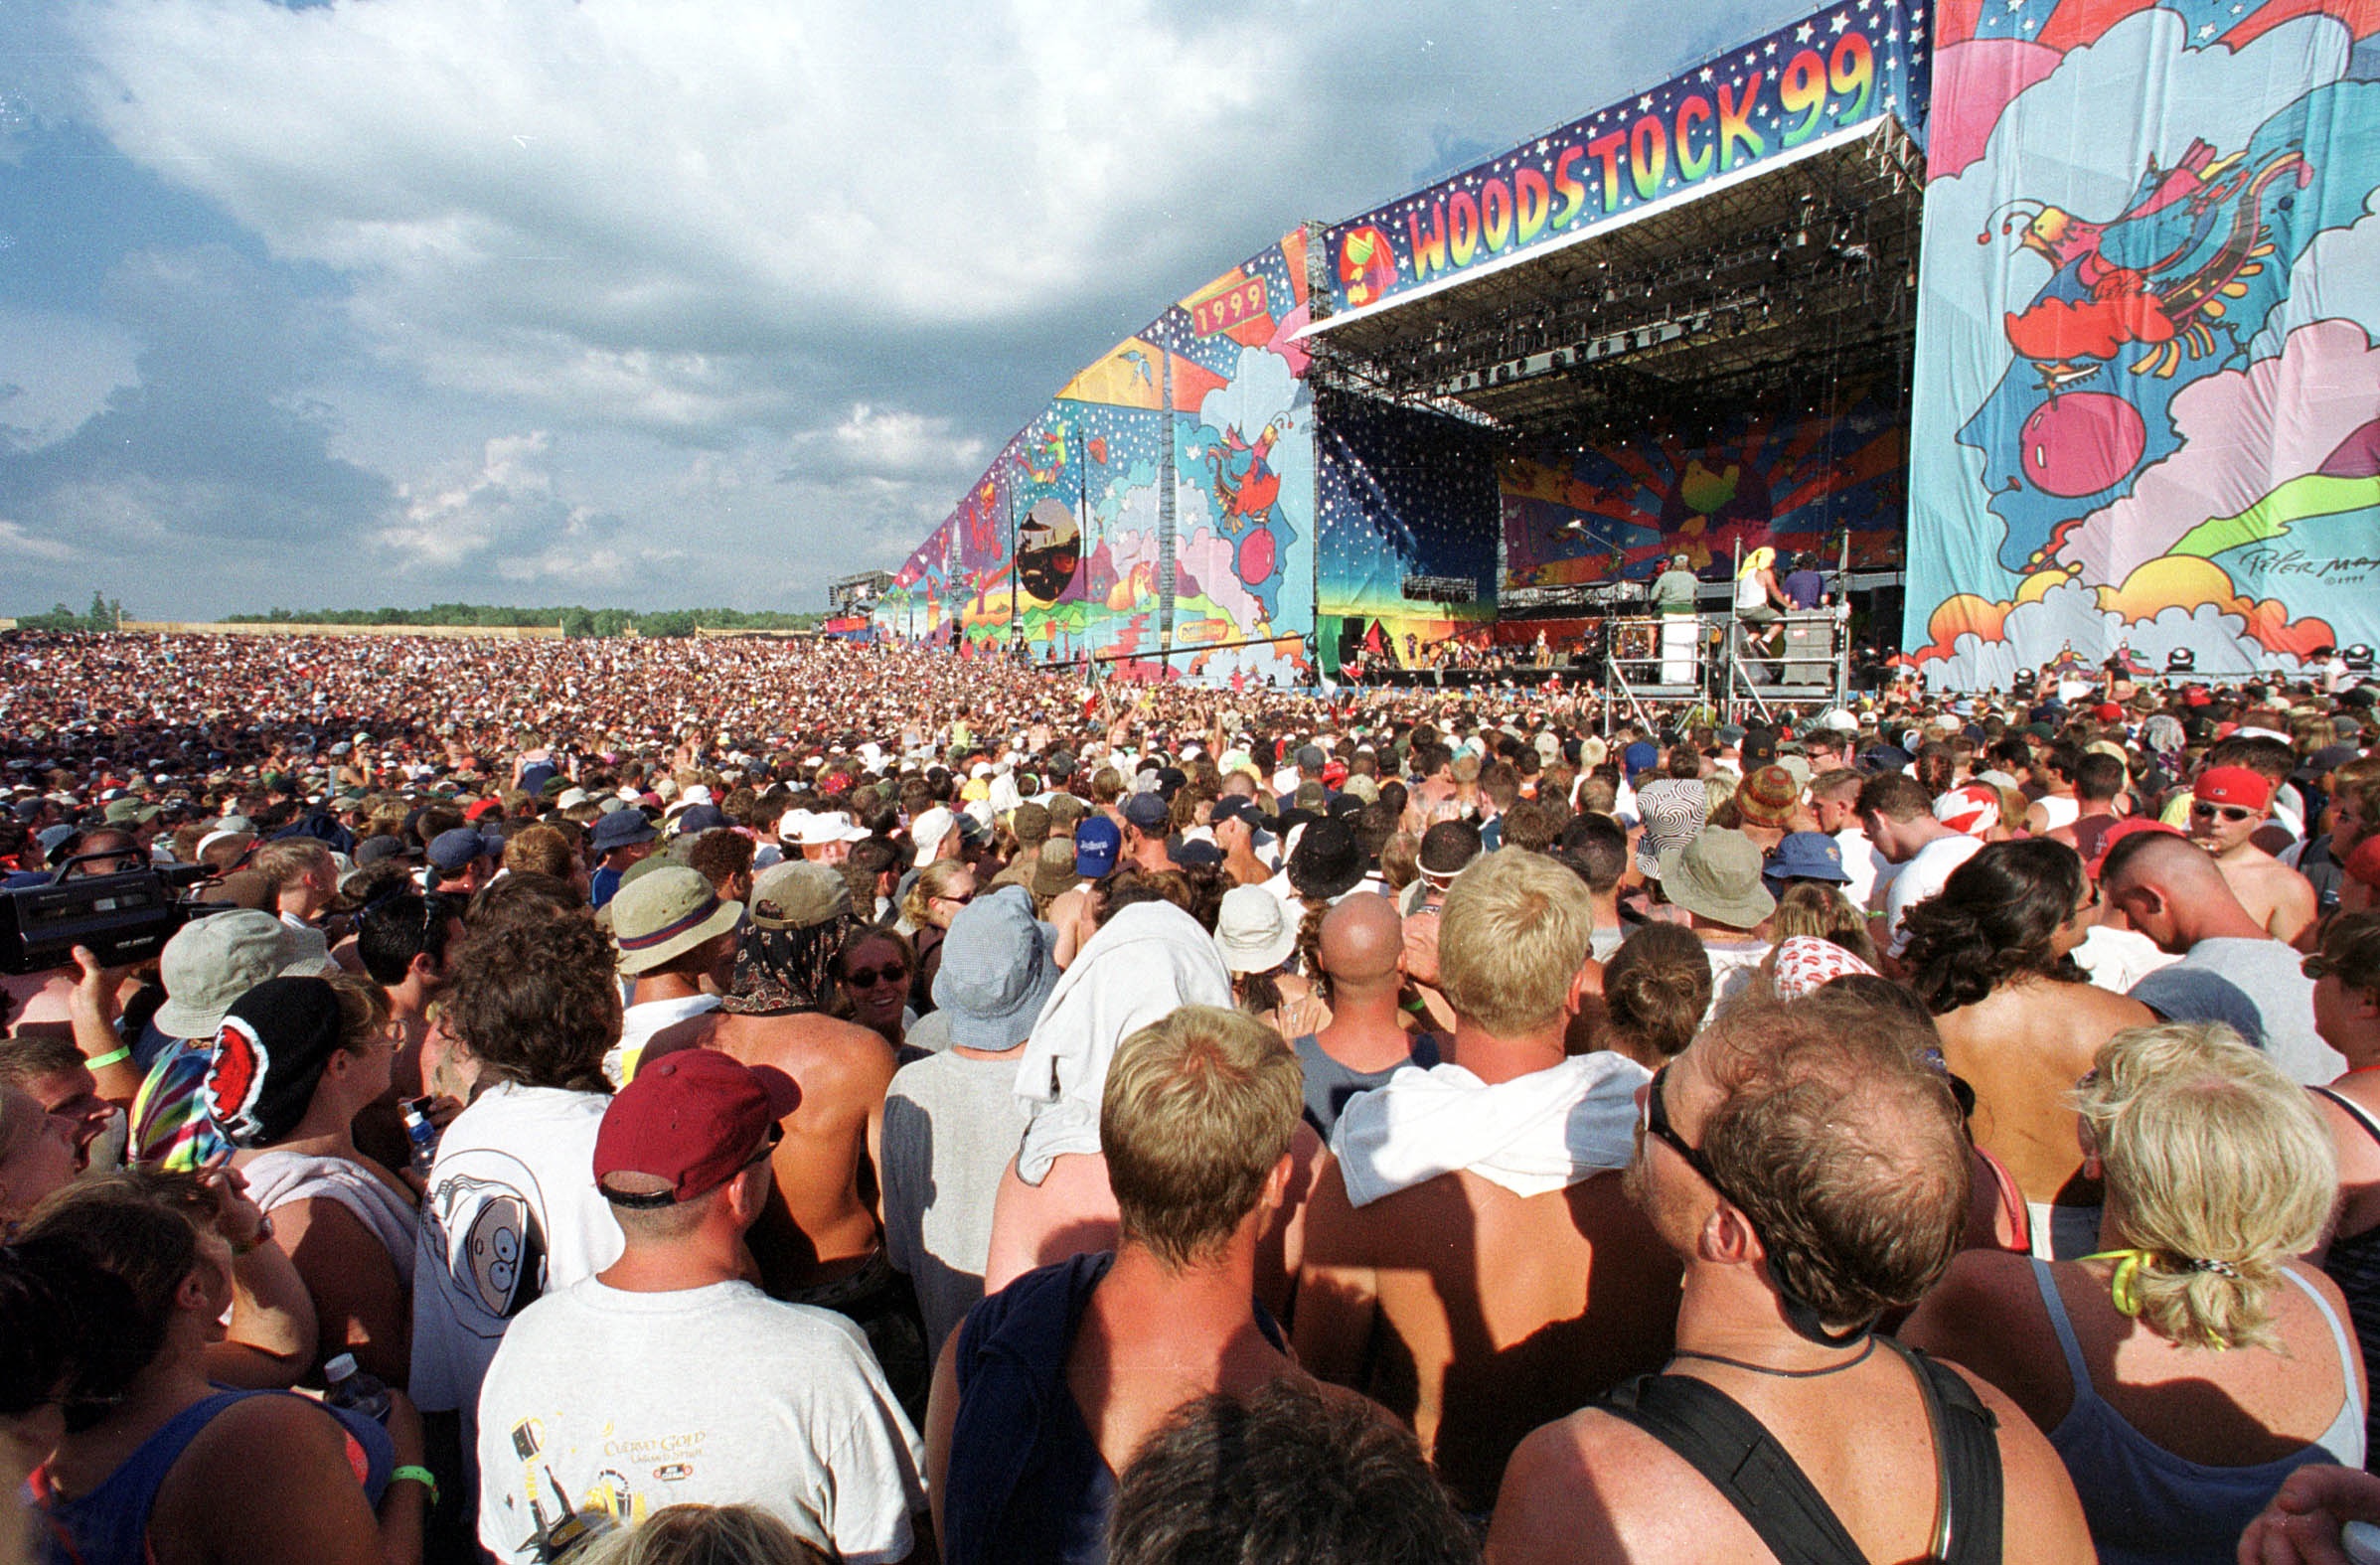 Woodstock 99 Spins Live Report From the Music Festival image picture